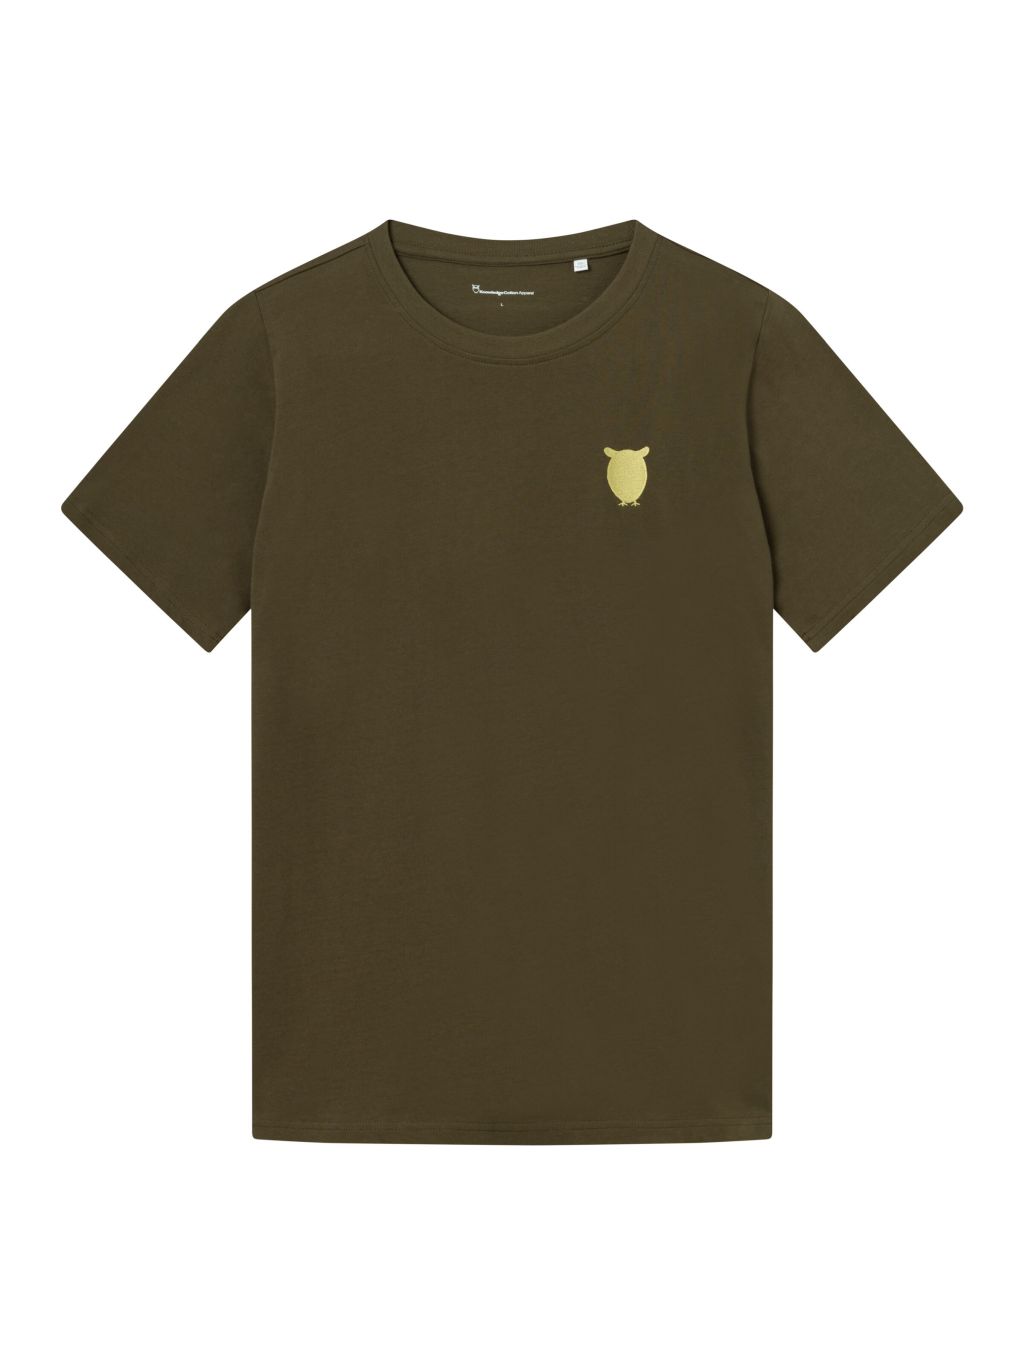 Regular Fit Owl Chest Embroidery Dark Olive S